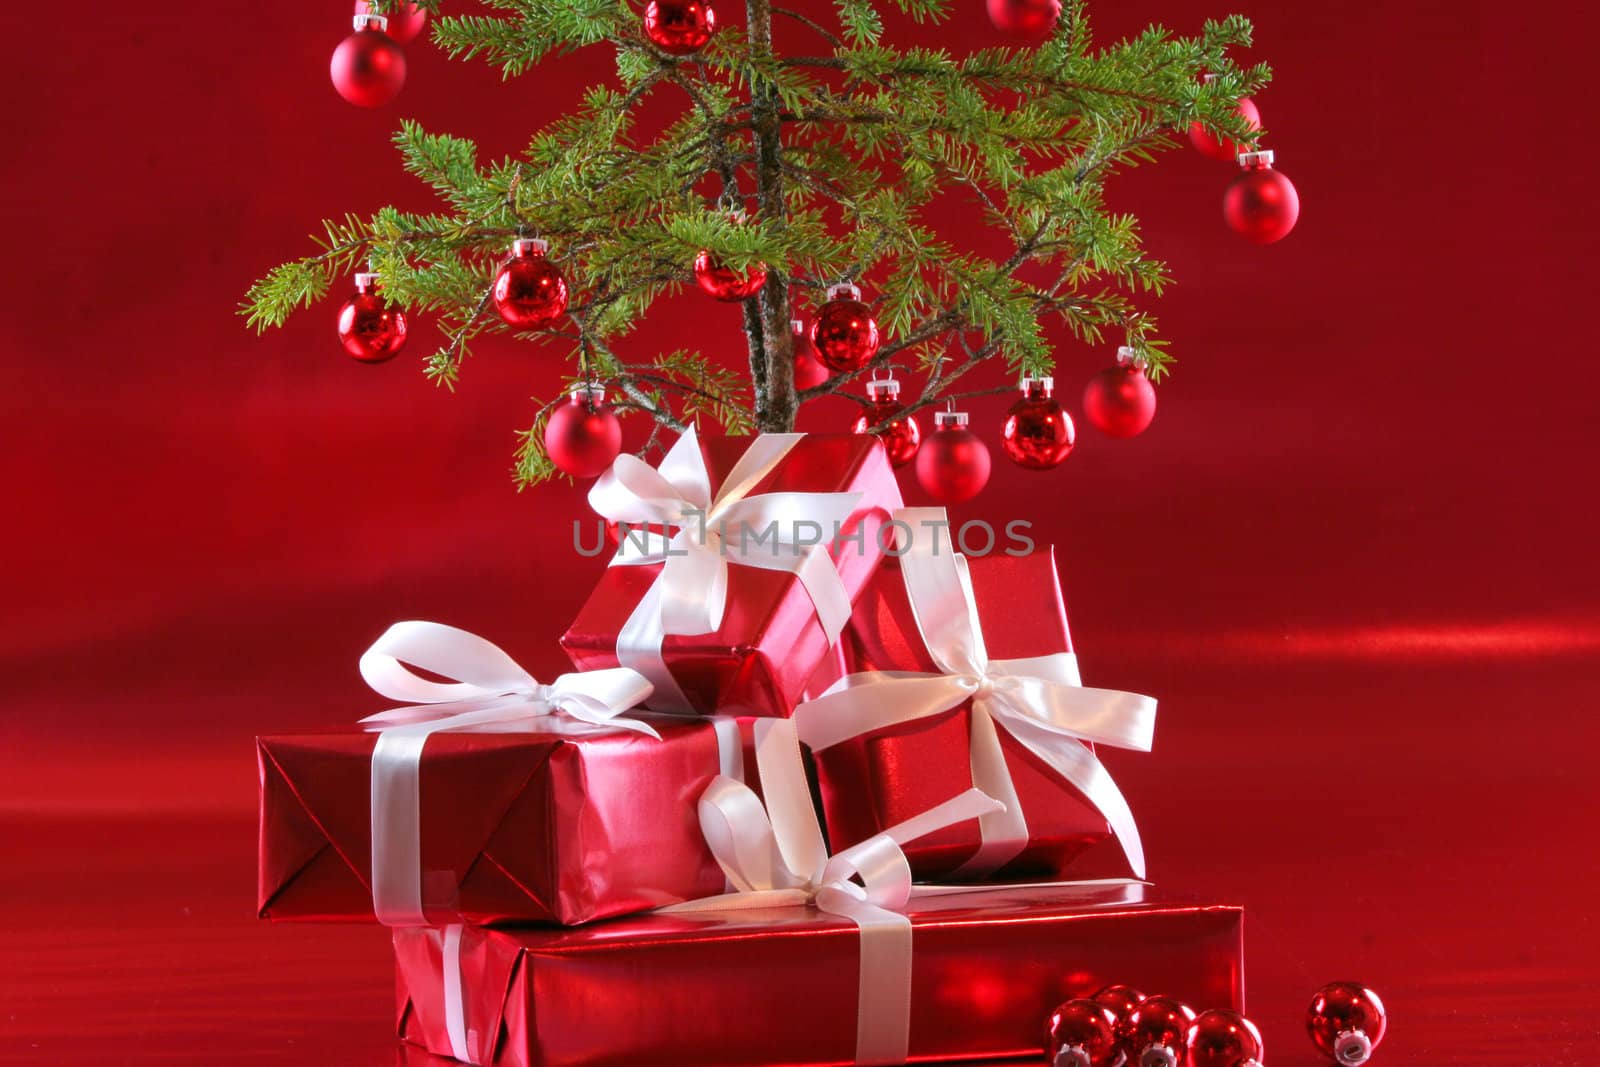 Elegant red presents under Christmas tree with deep rich red background.